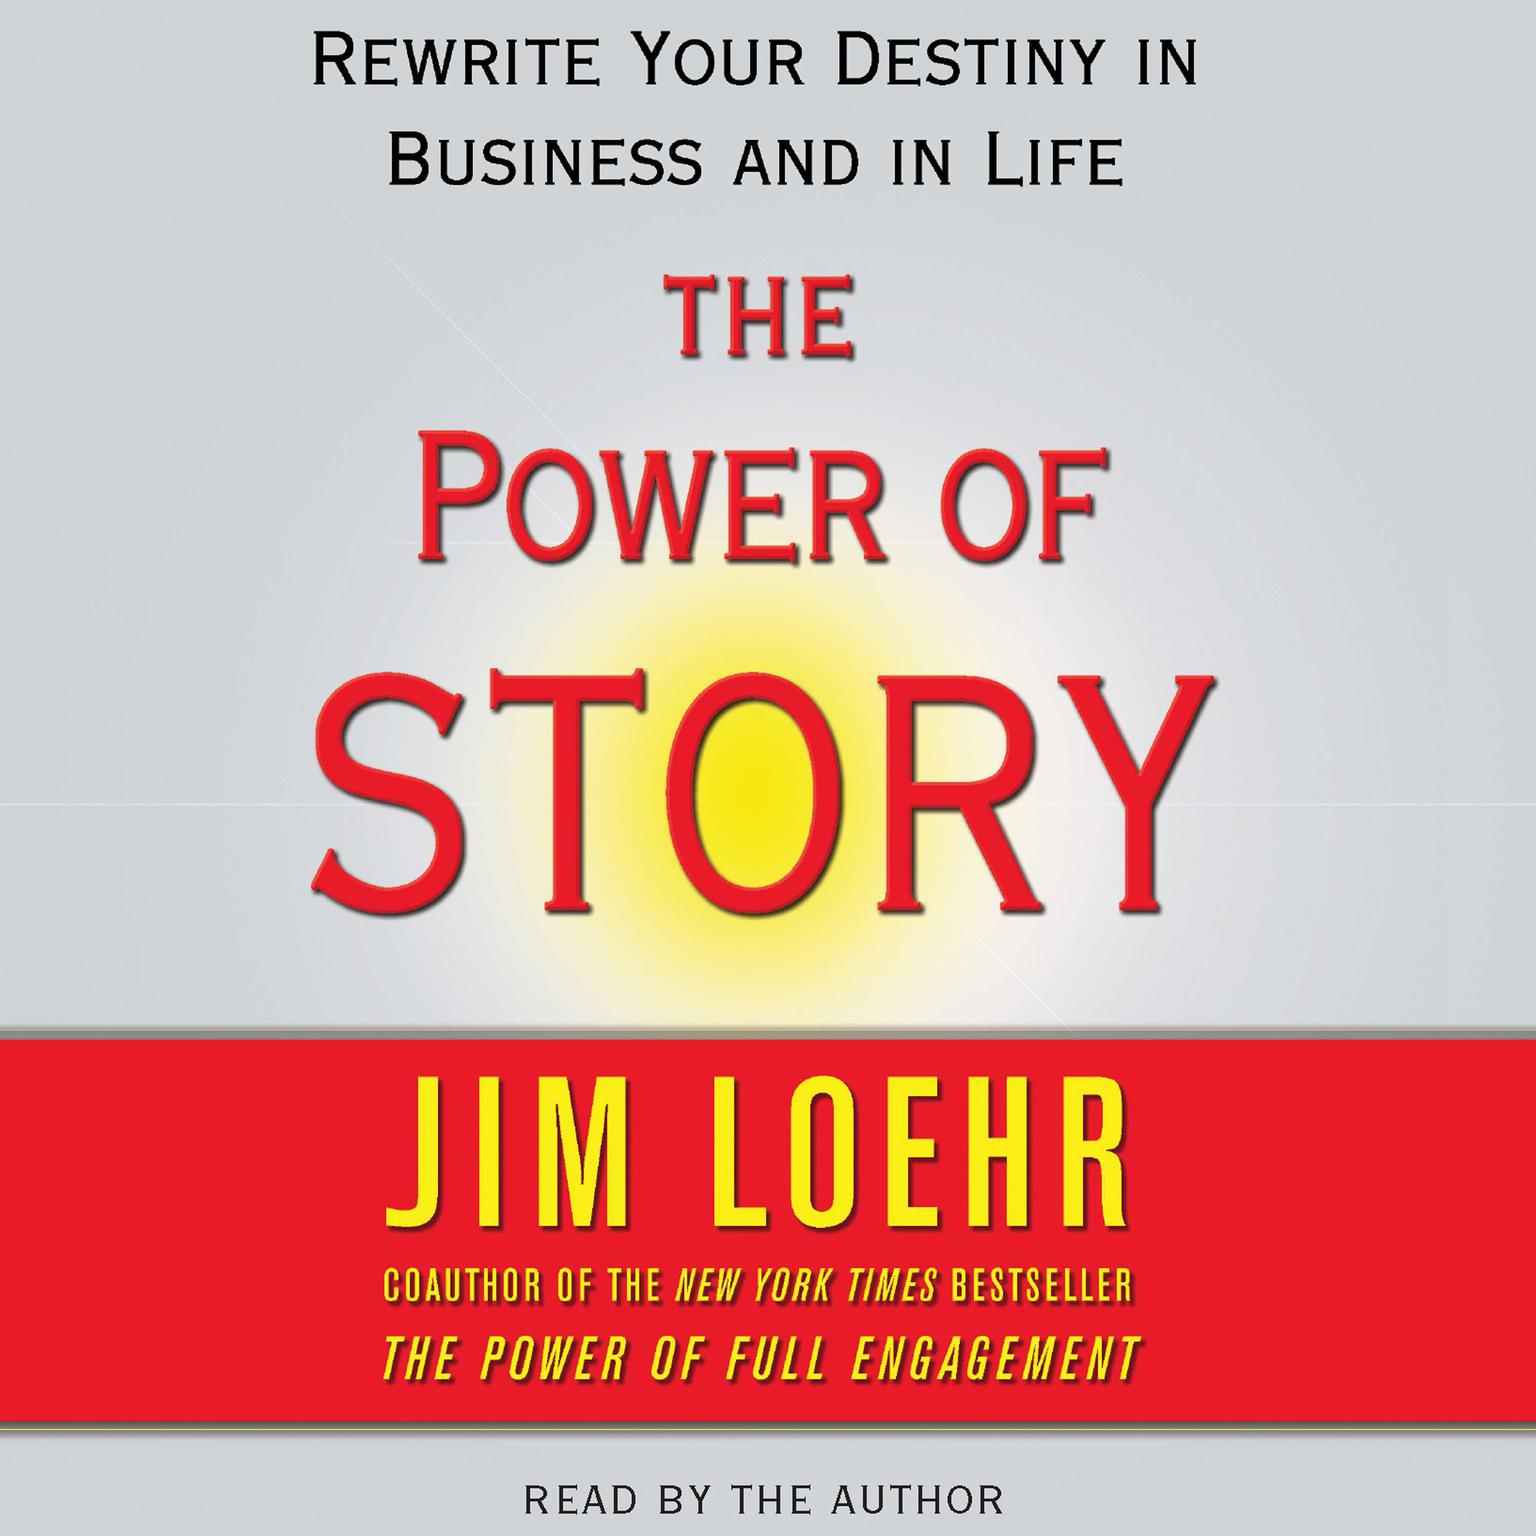 Power of Story (Abridged): Rewrite Your Destiny in Business and in Life Audiobook, by Jim Loehr